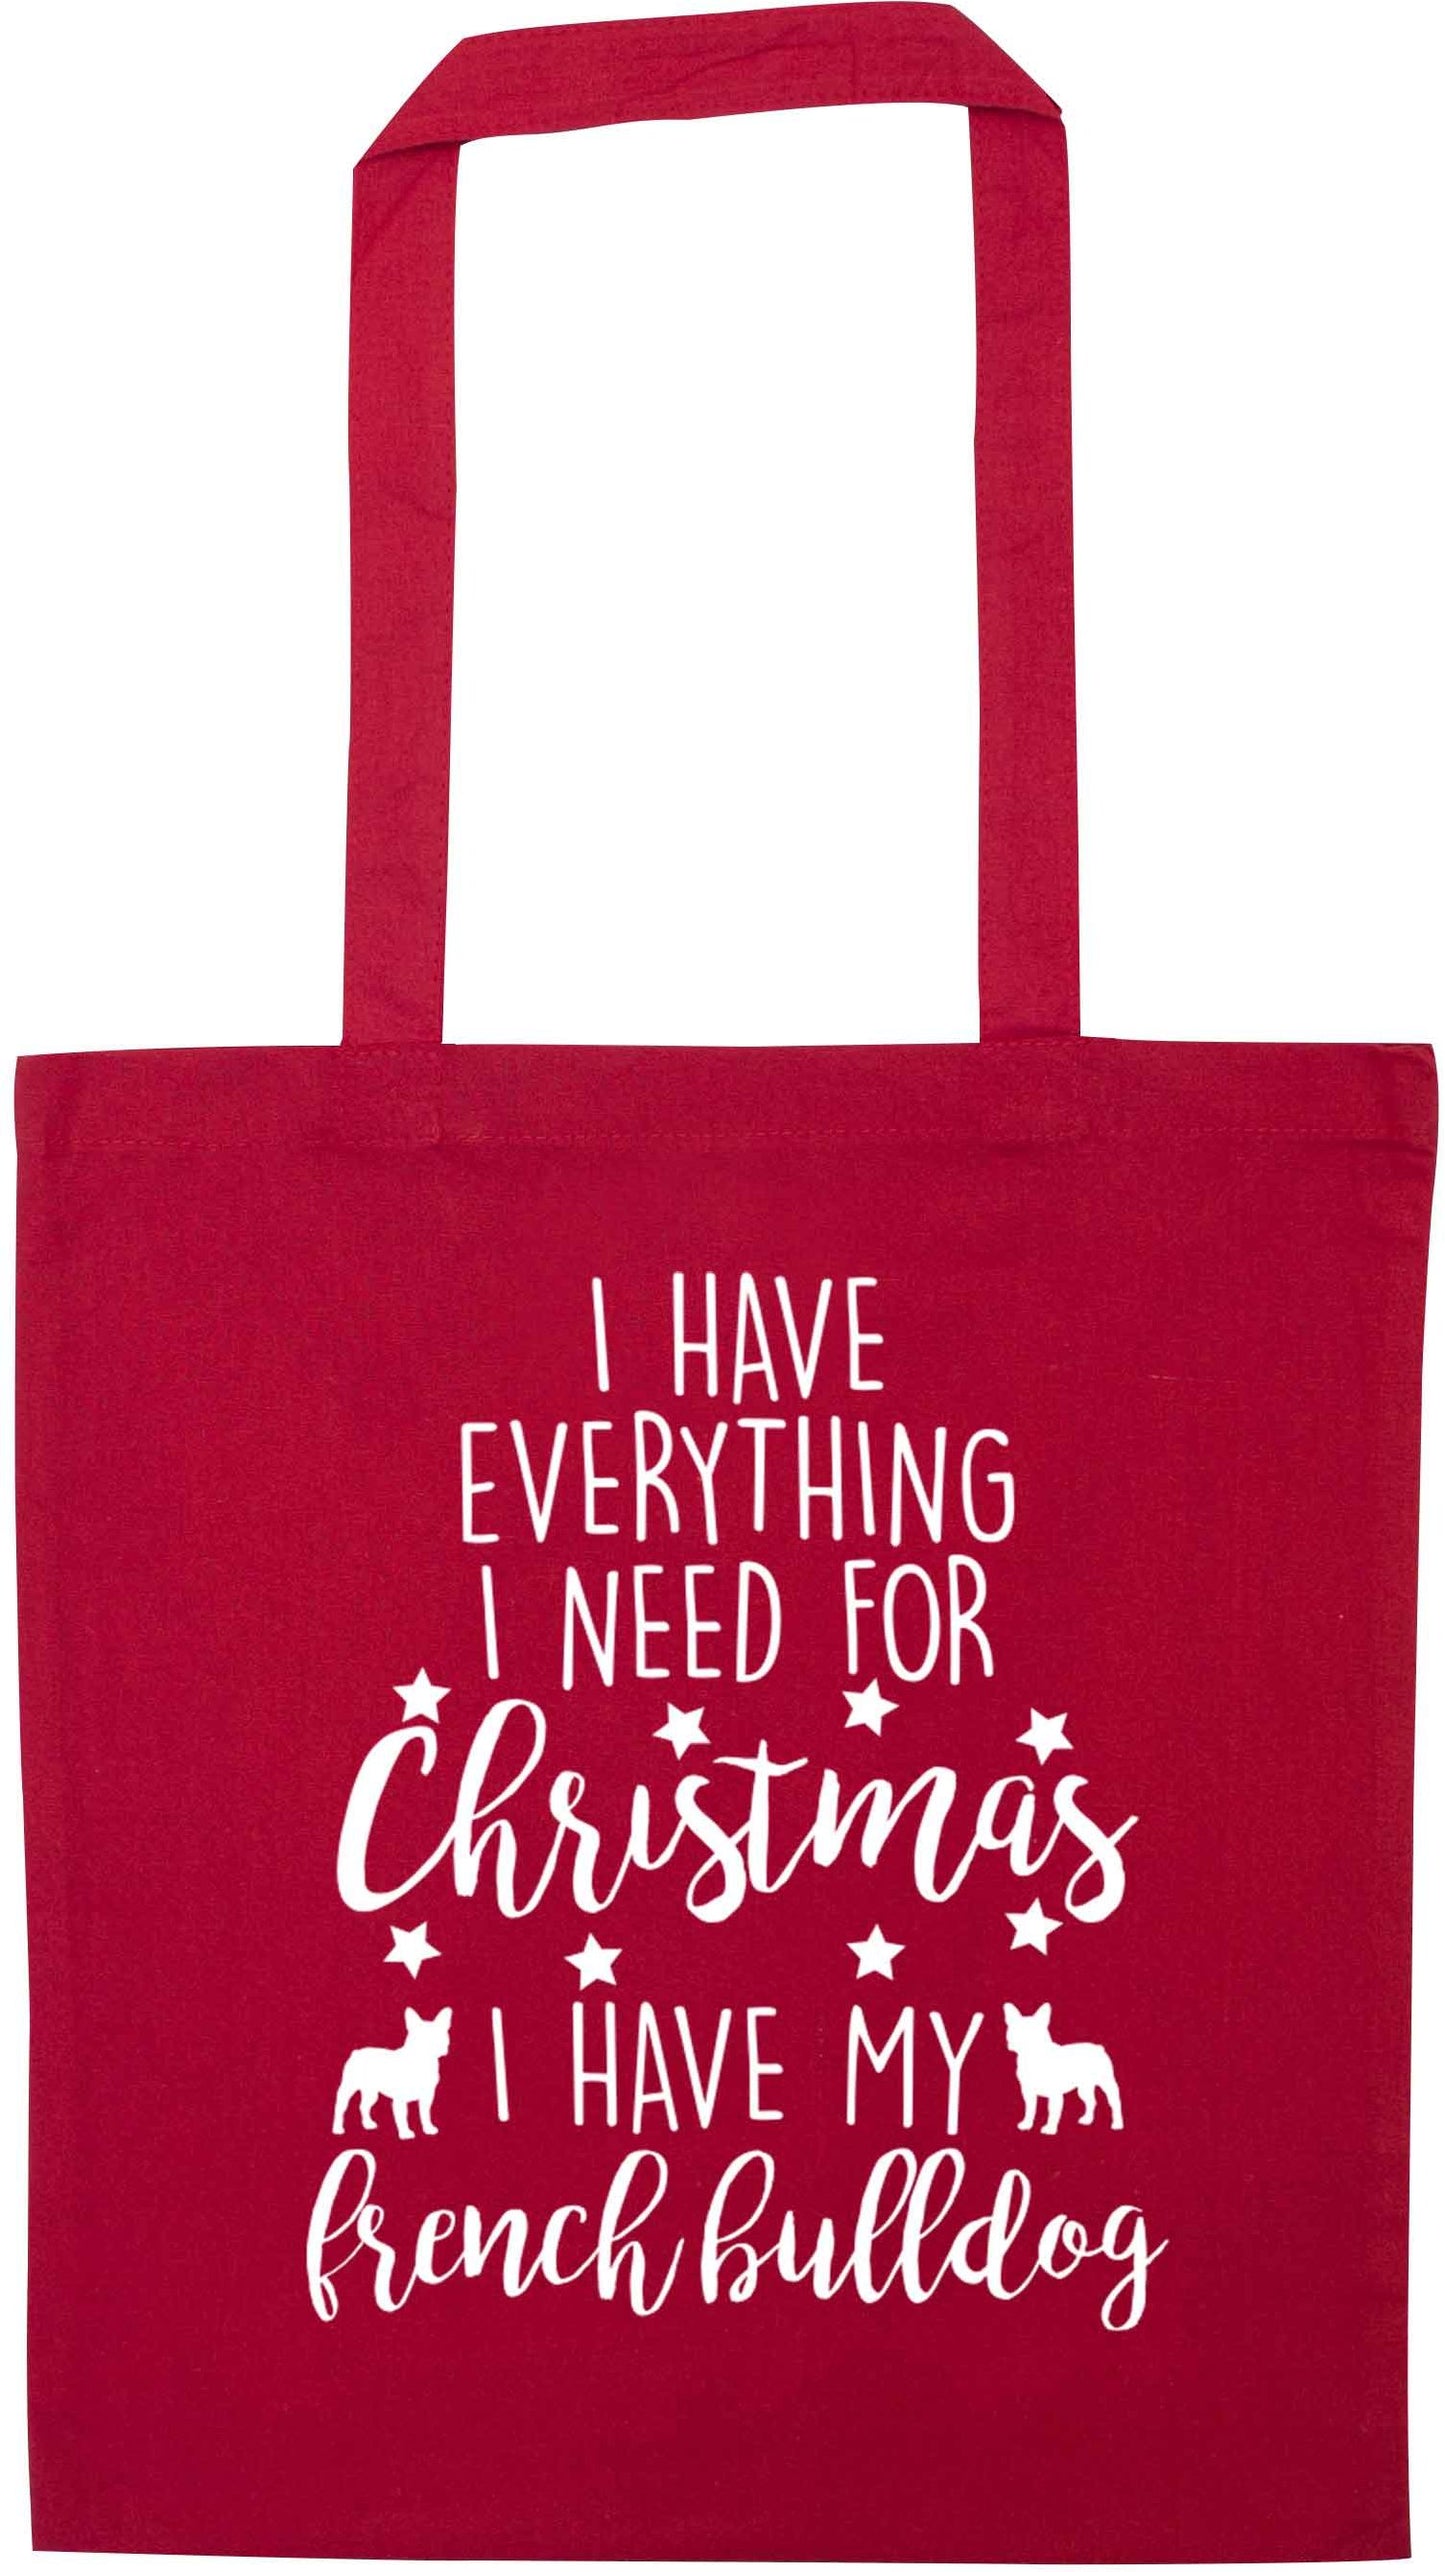 I have everything I need for Christmas I have my french bulldog red tote bag